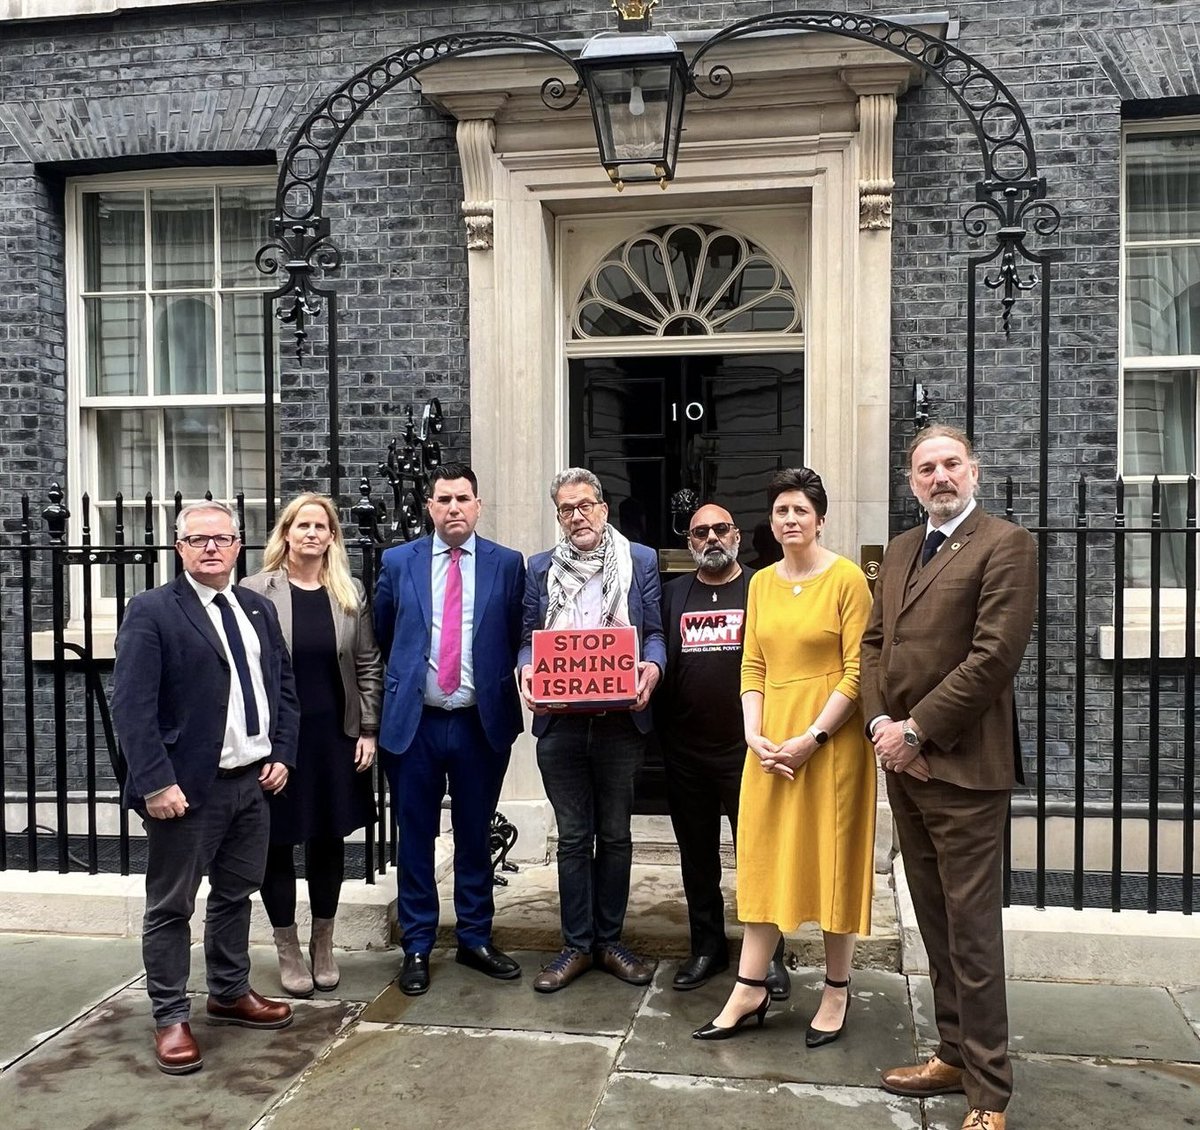 Joined @WaronWant & @PSCupdates to hand in a 64,000 name petition demanding end to arms sales to Israel. Delighted to join @theSNP colleagues @alisonthewlis & @chrislawSNP as well as fellow parliamentarians @BethWinterMP & @RichardBurgon in taking message directly to the UK govt.